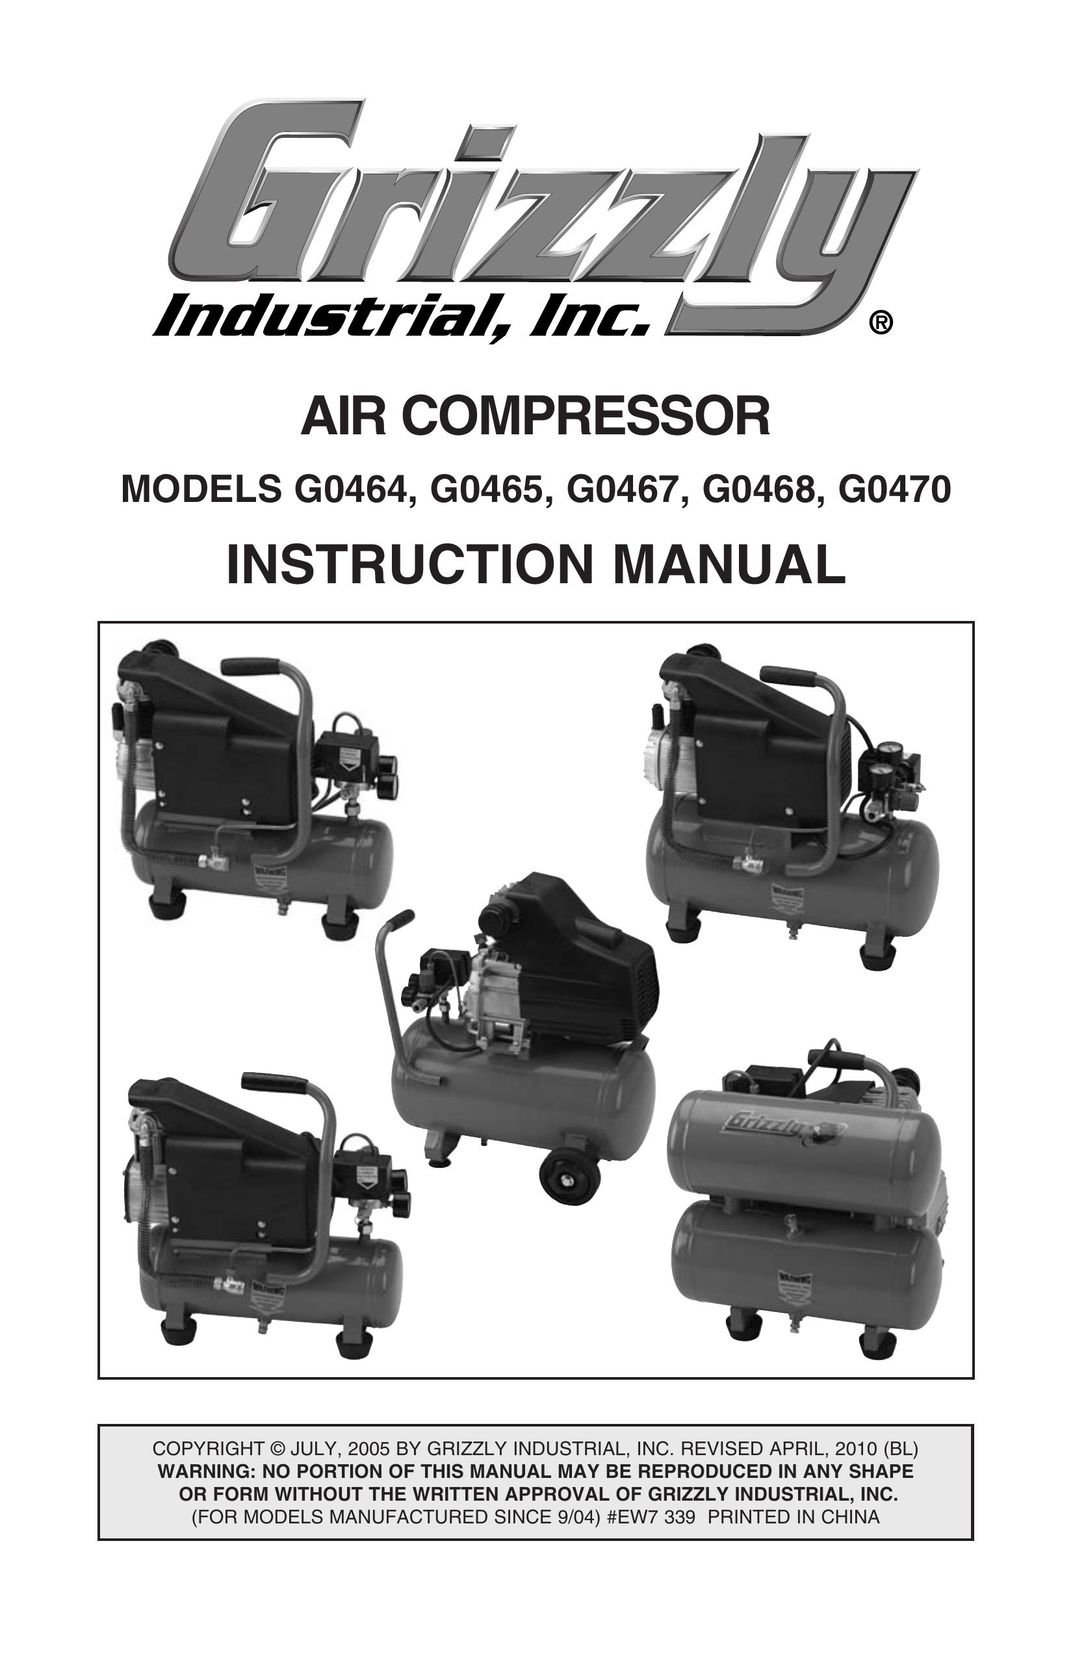 Grizzly G0470 Air Compressor User Manual